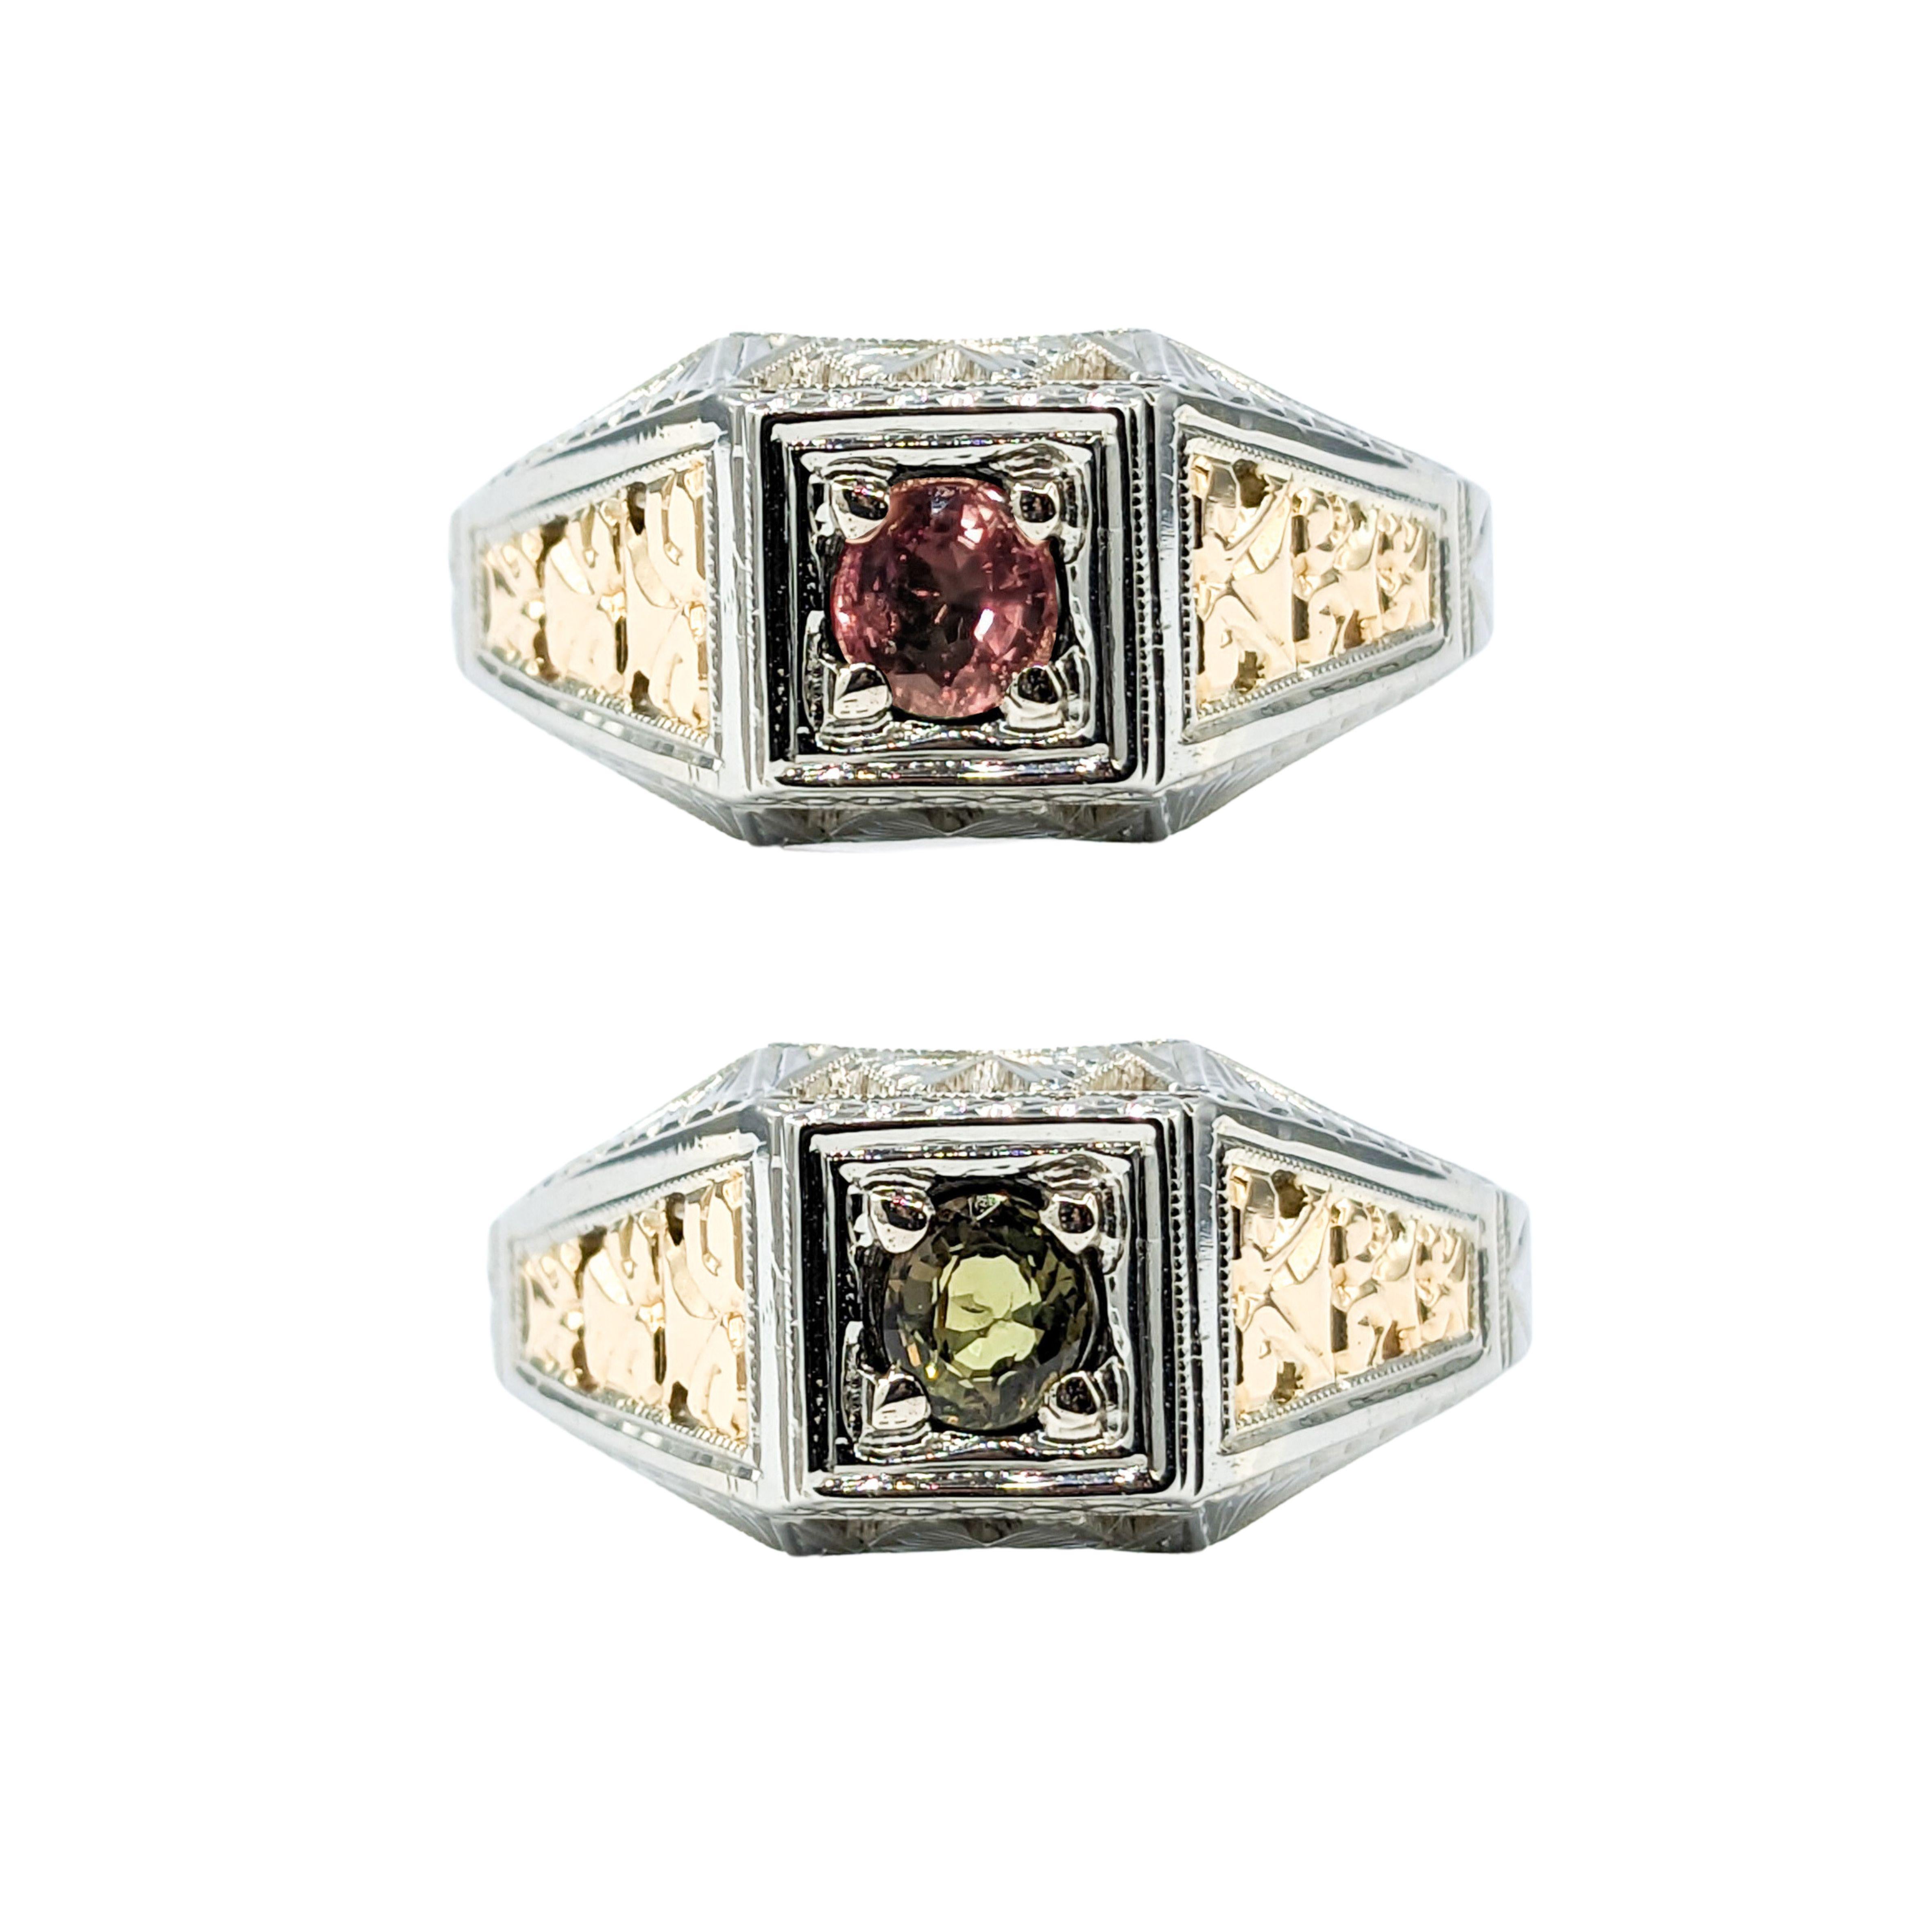 Antique Color Change .38ct Alexandrite Ring 18Kt Two-Tone Gold

Introducing a breathtaking ring, exquisitely crafted in 18KT Two-Tone gold. The center stone has been updated to a beautiful color changing .38ct natural Alexandrite that changes from